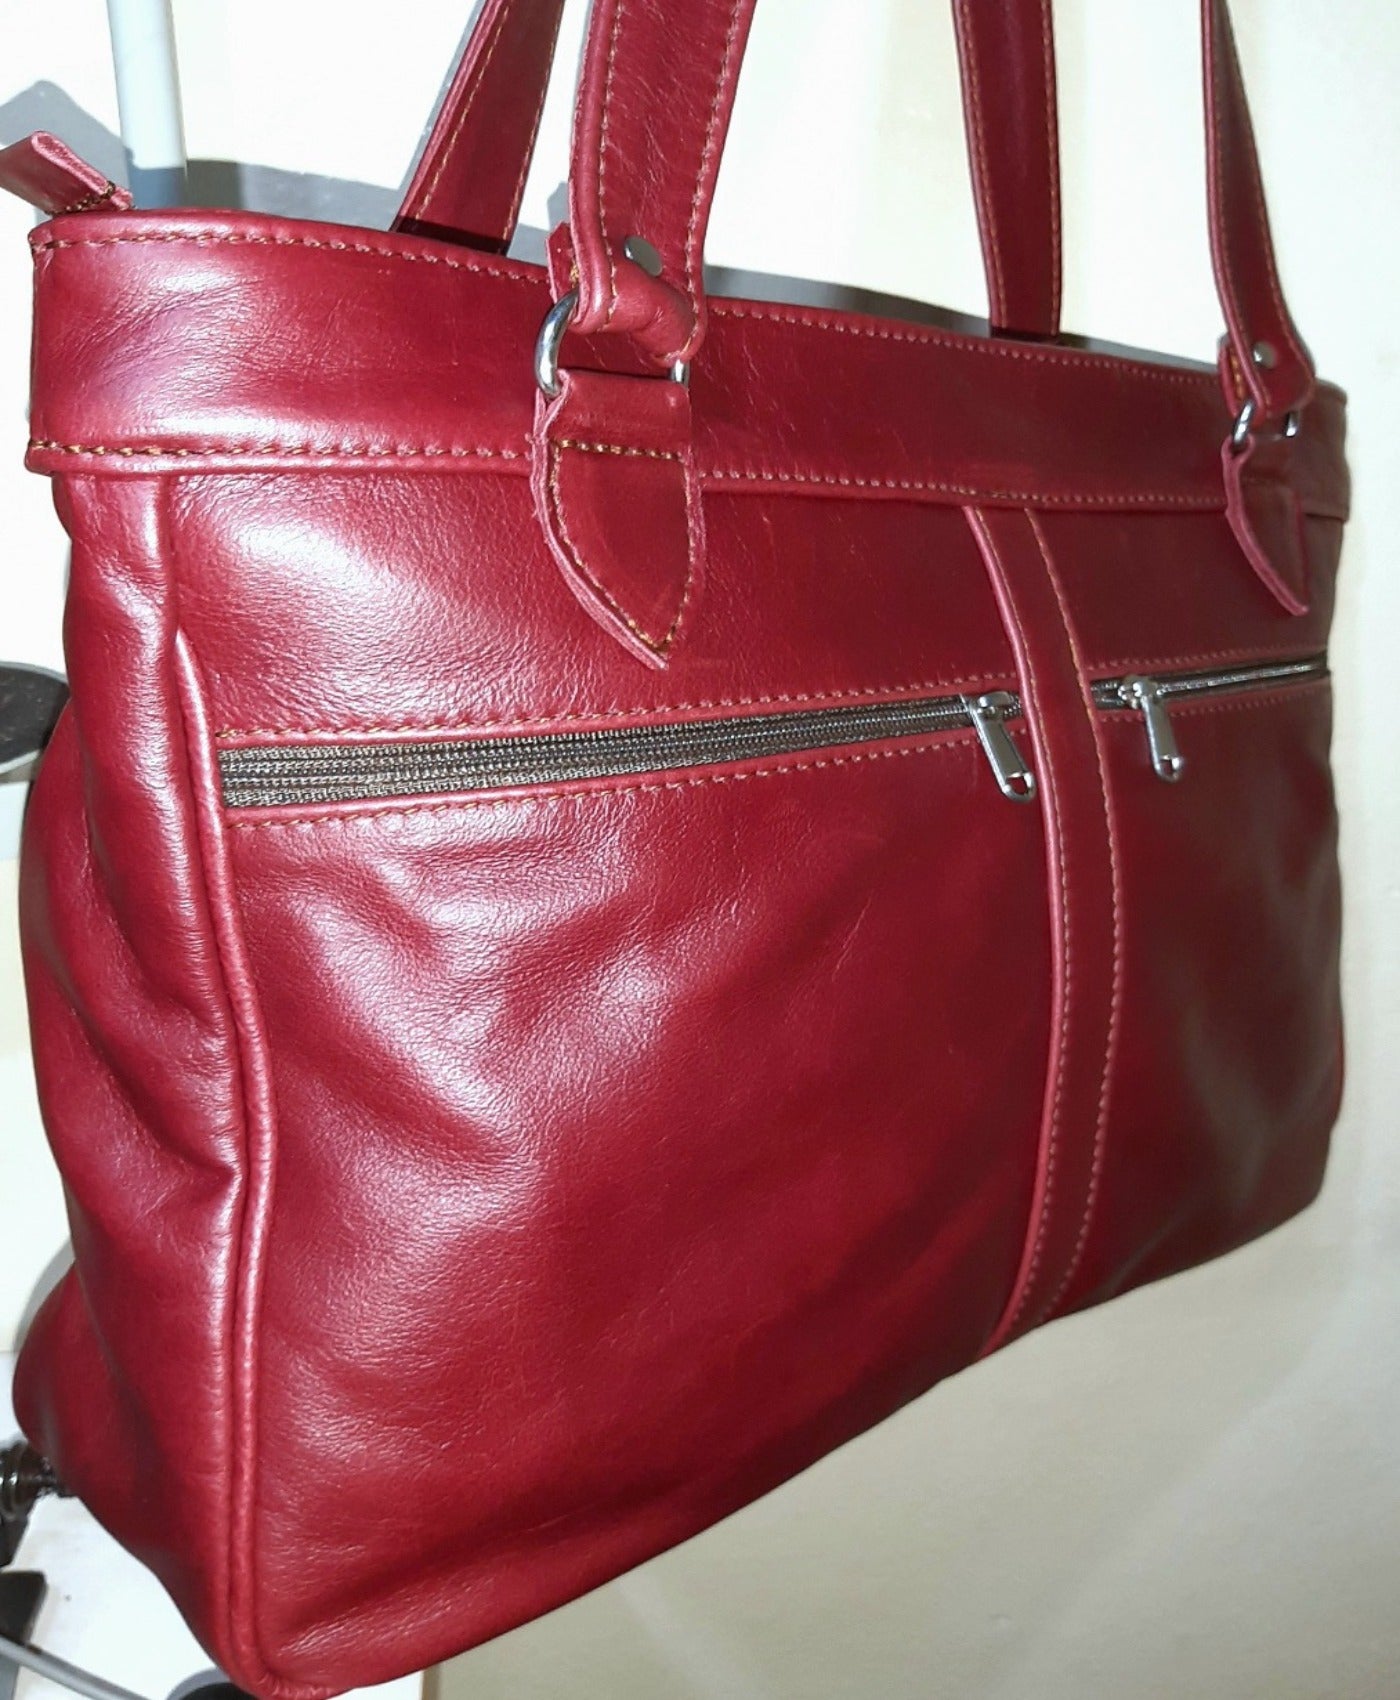 Tote leather bags Xl in cherry red colour made by  cape Masai Leather